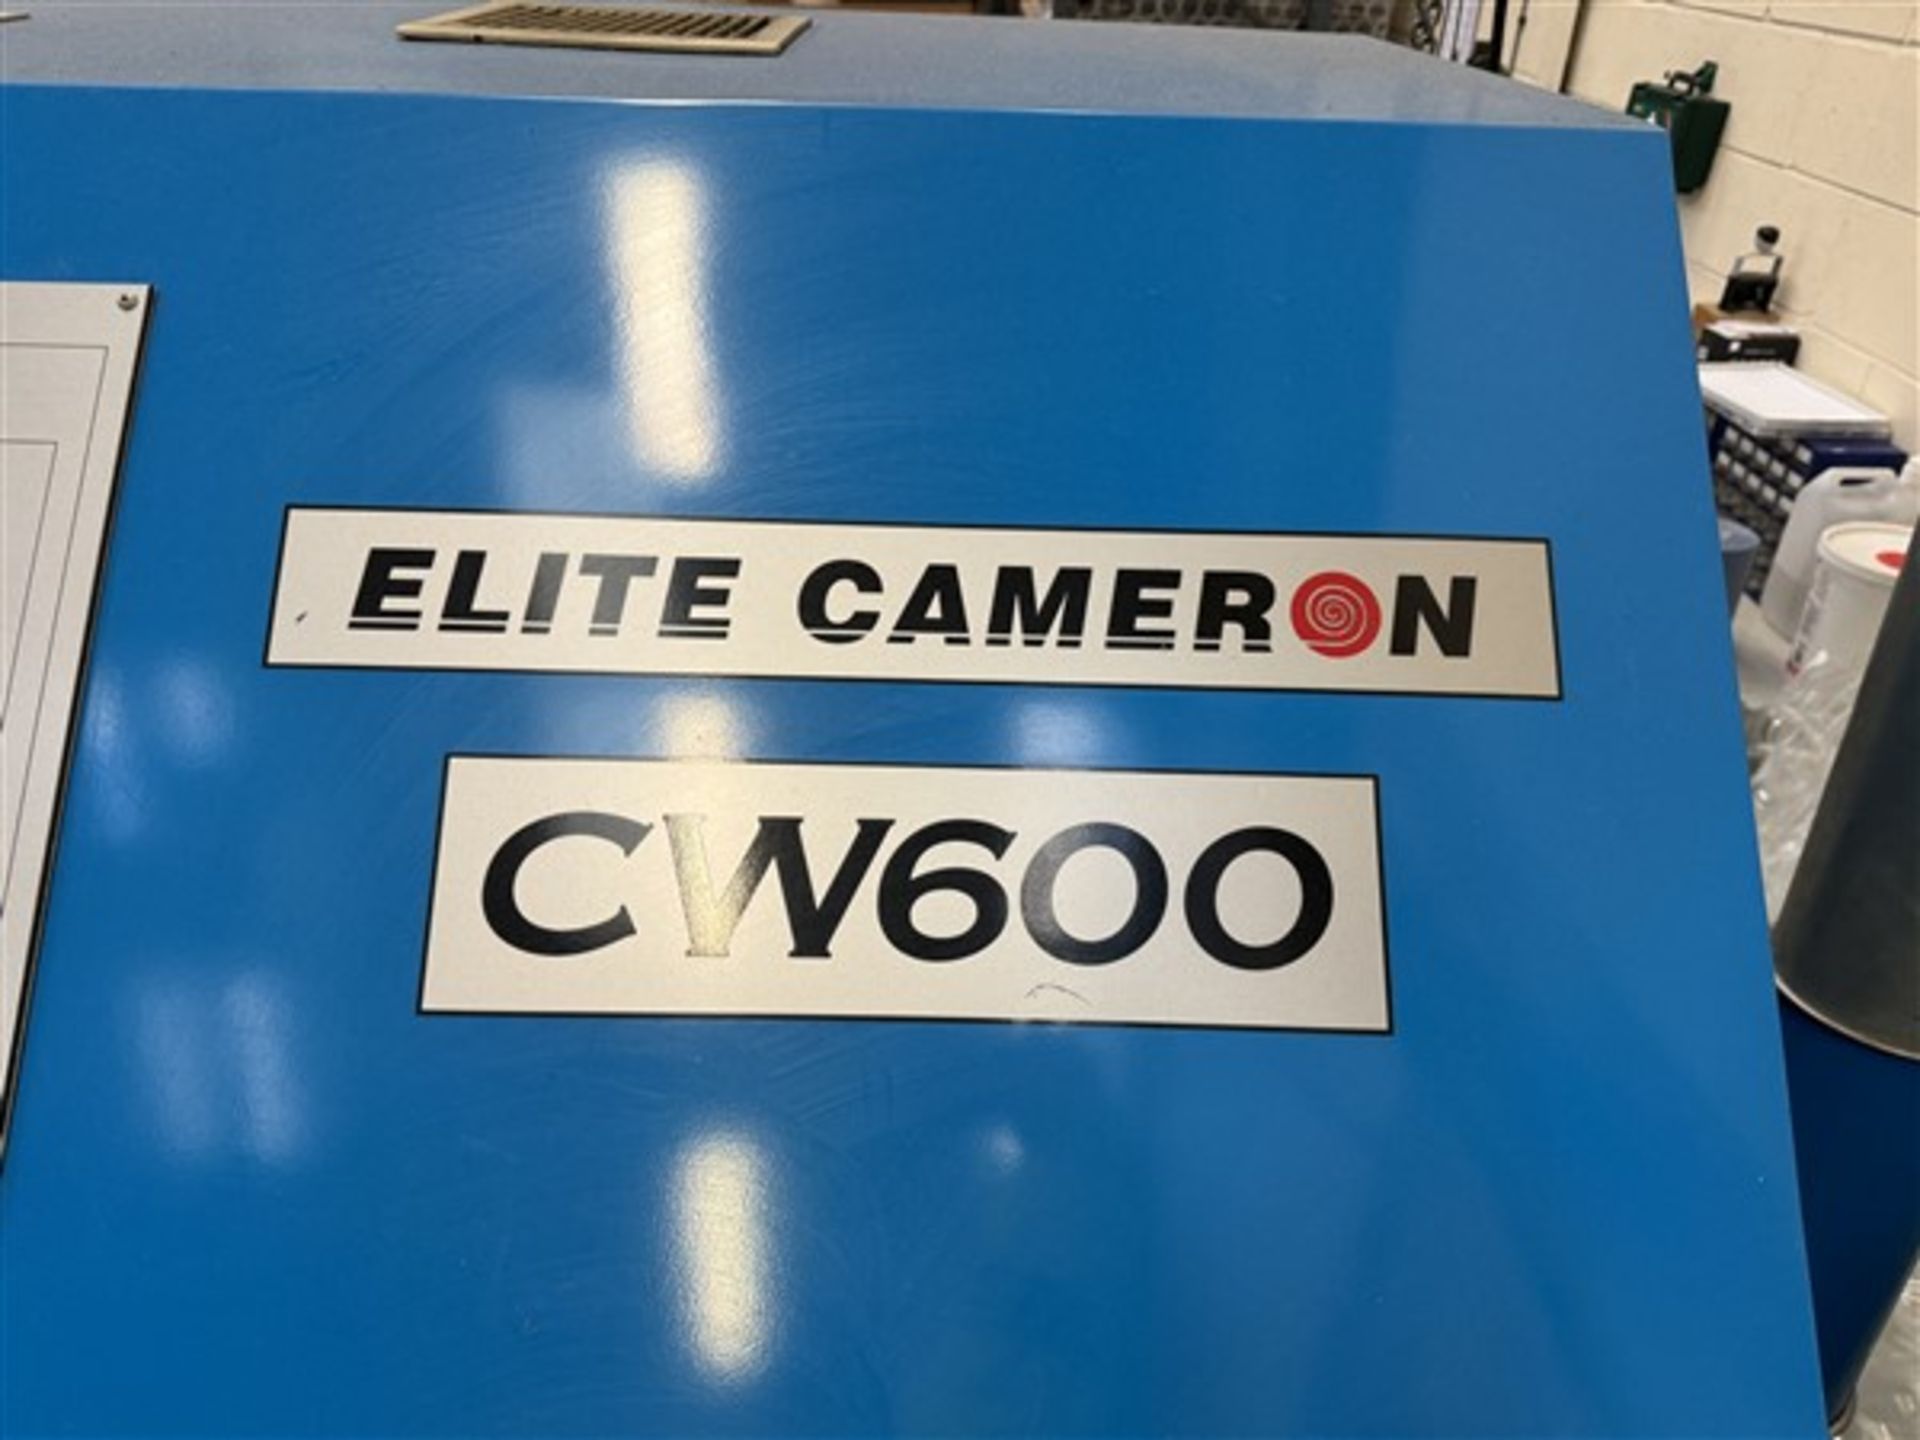 Elite Cameron CW600 automatic slitting machine, serial no. M02030 (2001) A work Method Statement and - Image 3 of 14